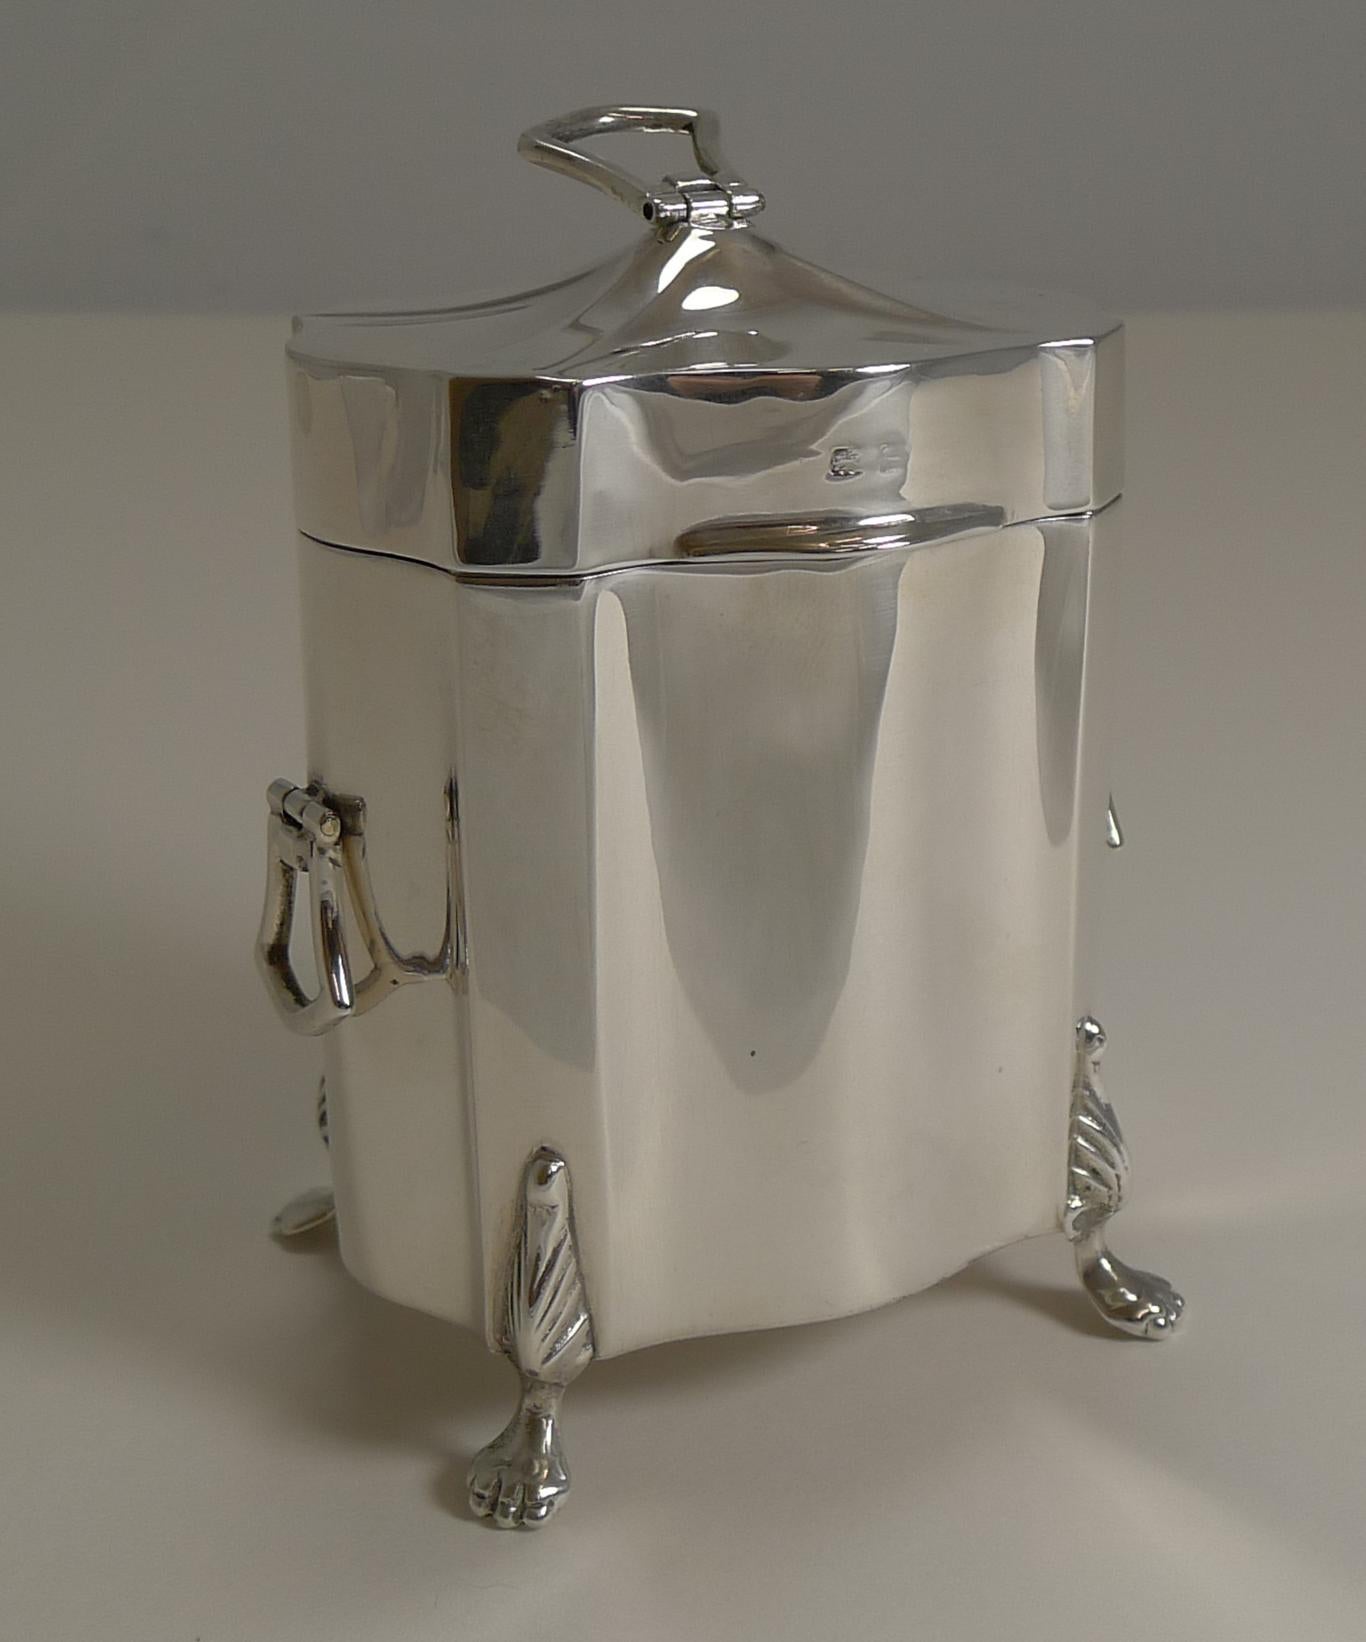 A fine example of an English sterling silver tea caddy, beautifully shaped and standing on four exquisite legs.

The top is crowned with a folding finial with two matching hinged handles to the side. The hinged lid fits perfectly and once opened